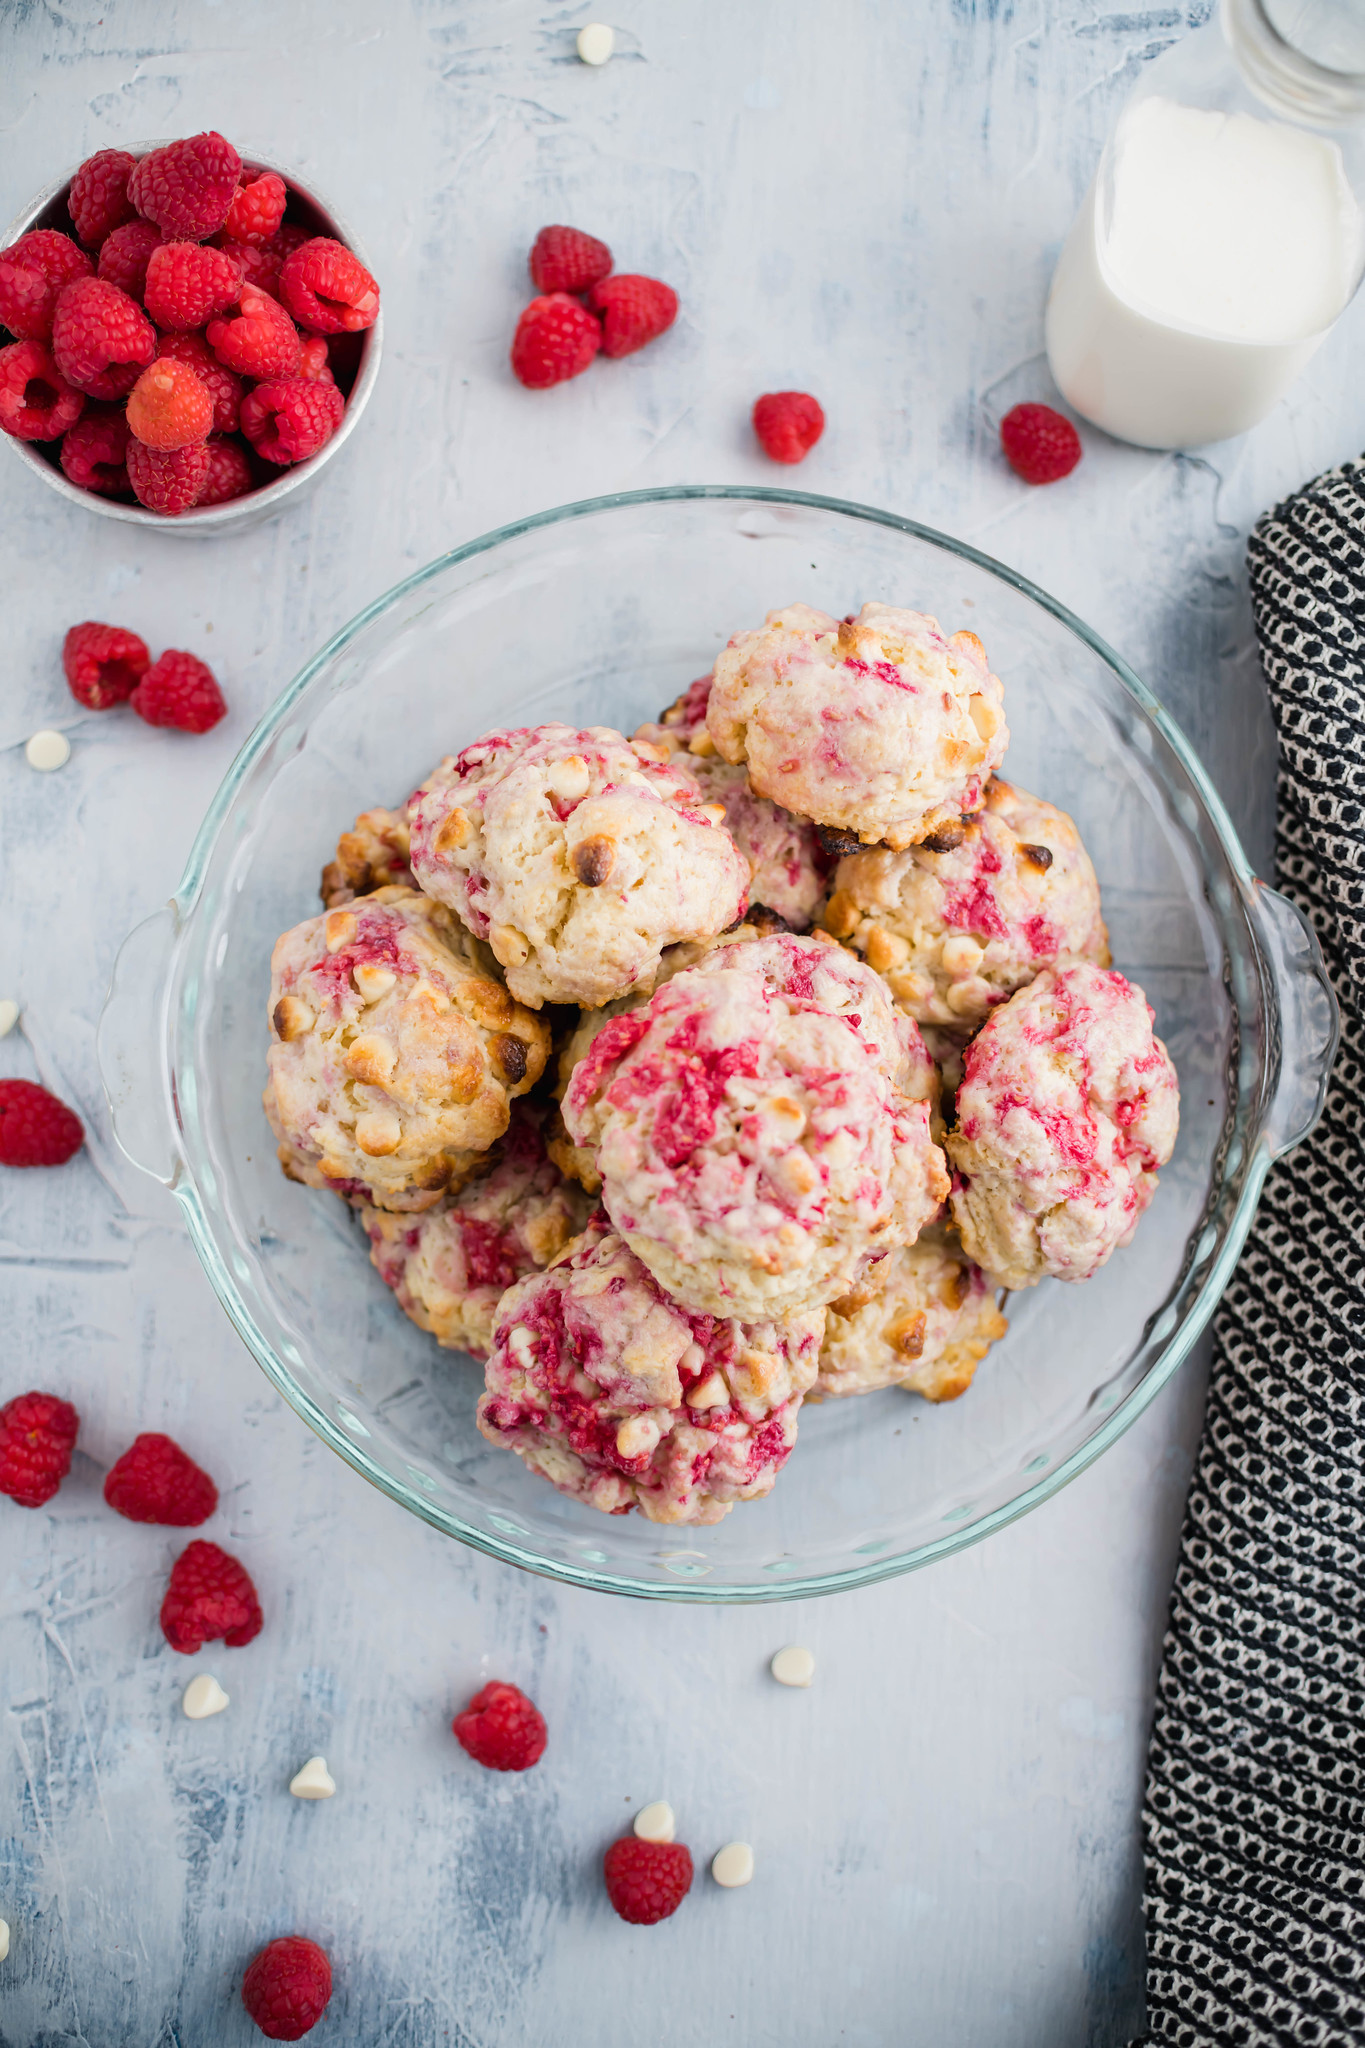 Glass pie plate piled high with raspberry and white chocolate scones. Small bowl of raspberries in upper left corner and heavy cream in a bottle in upper right corner.